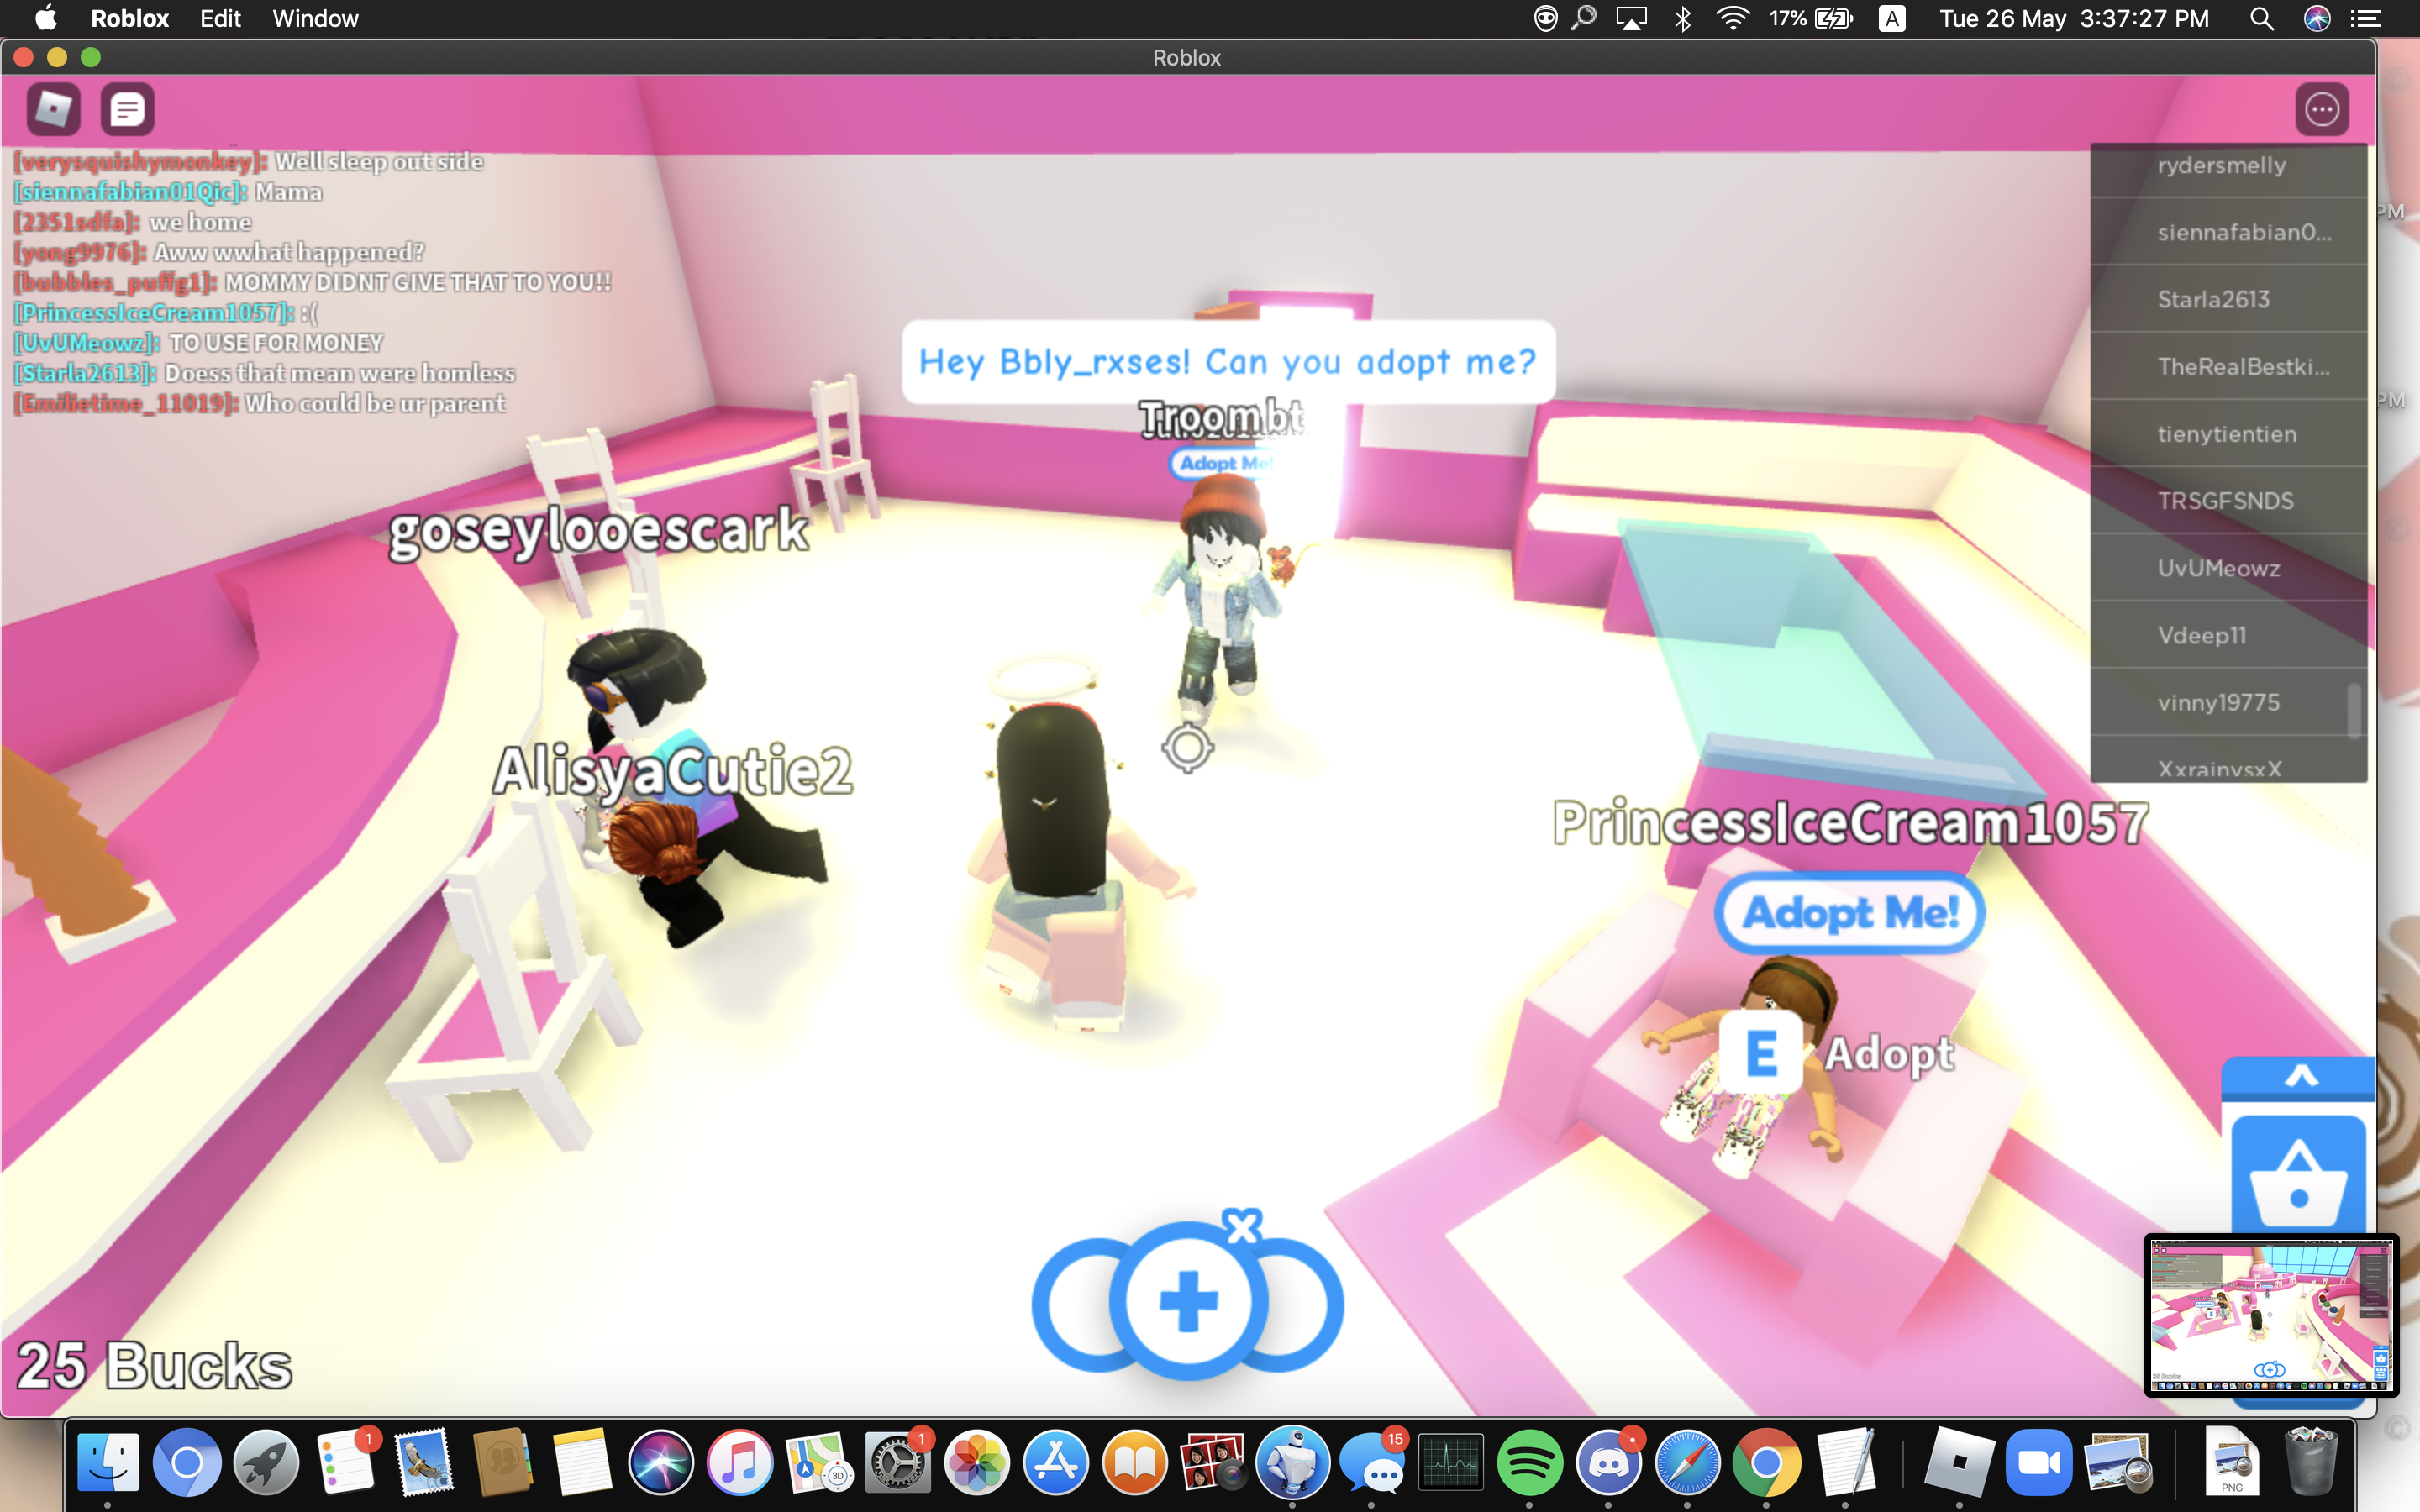 Went And Played Adopt Me Legacy D Link Below Fandom - games like adopt me on roblox